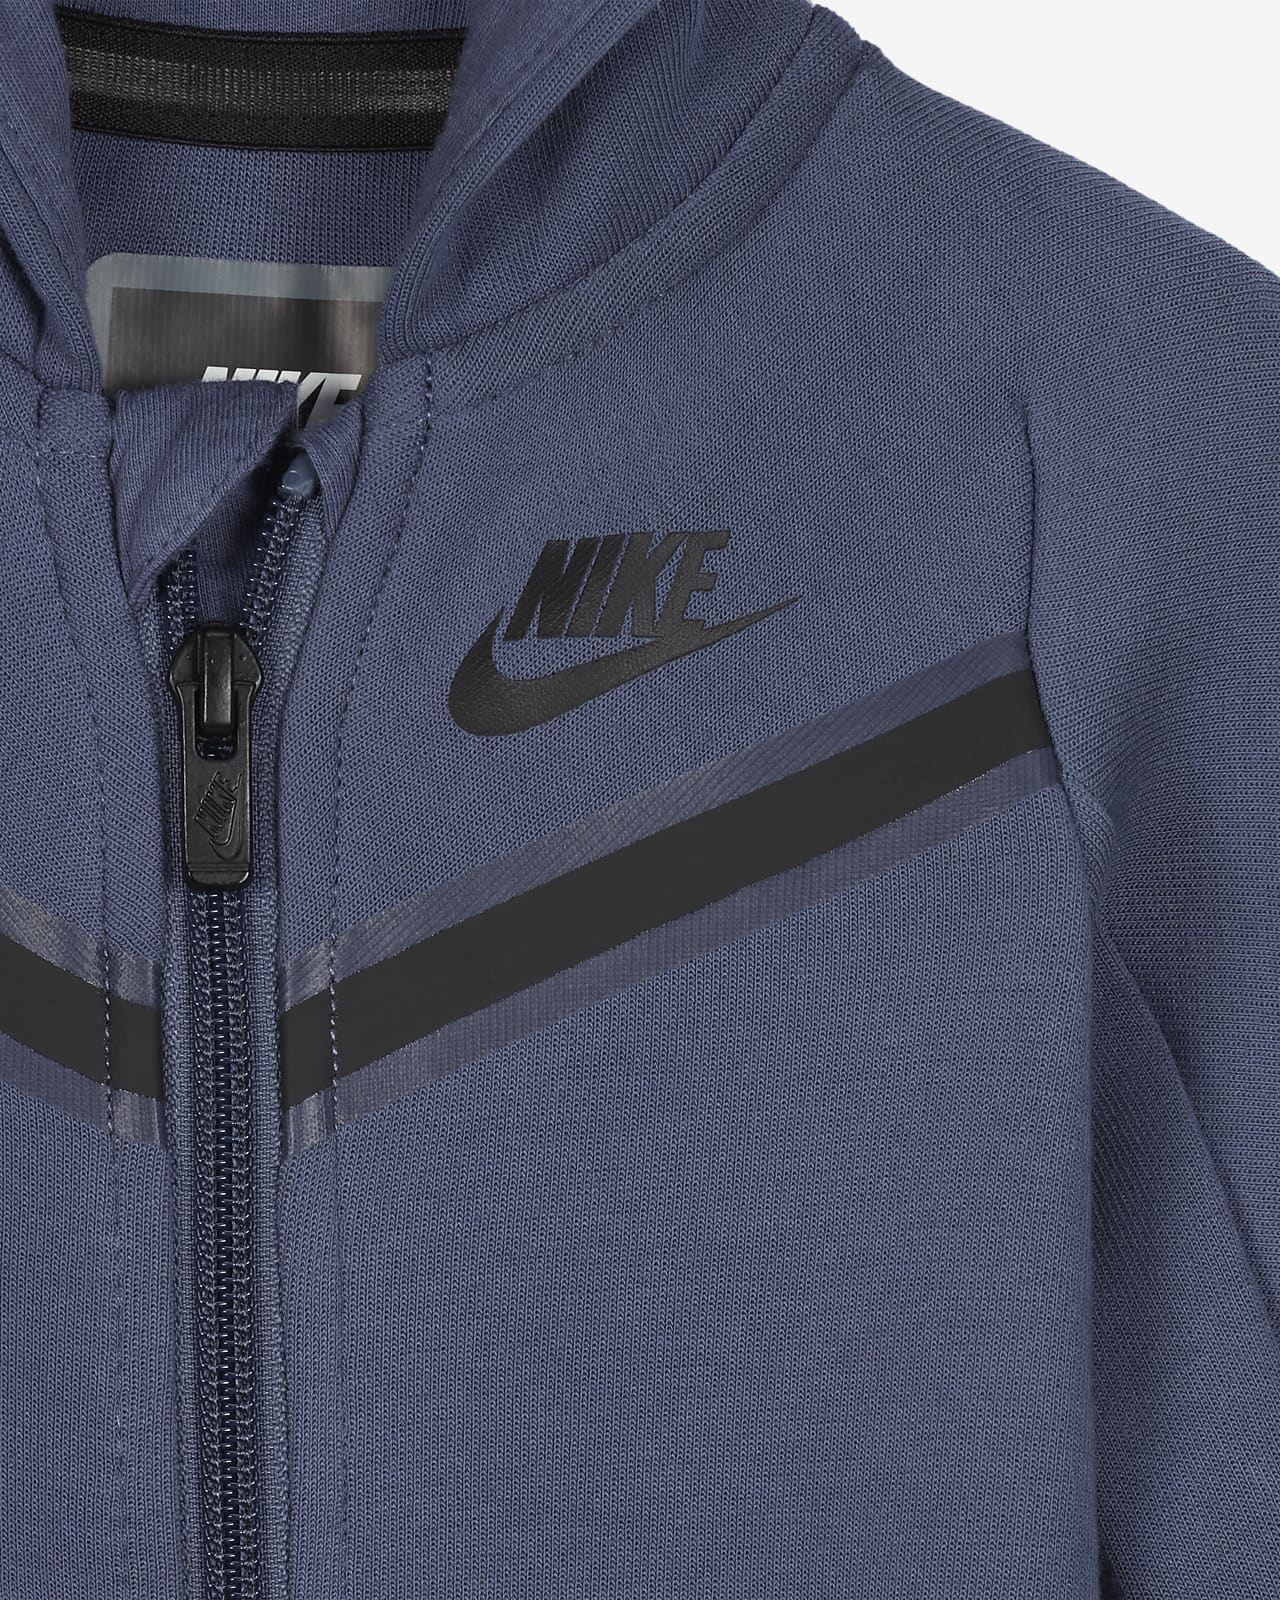 Alleged Lightning Also baby blue nike tech tracksuit Snack snatch Intact